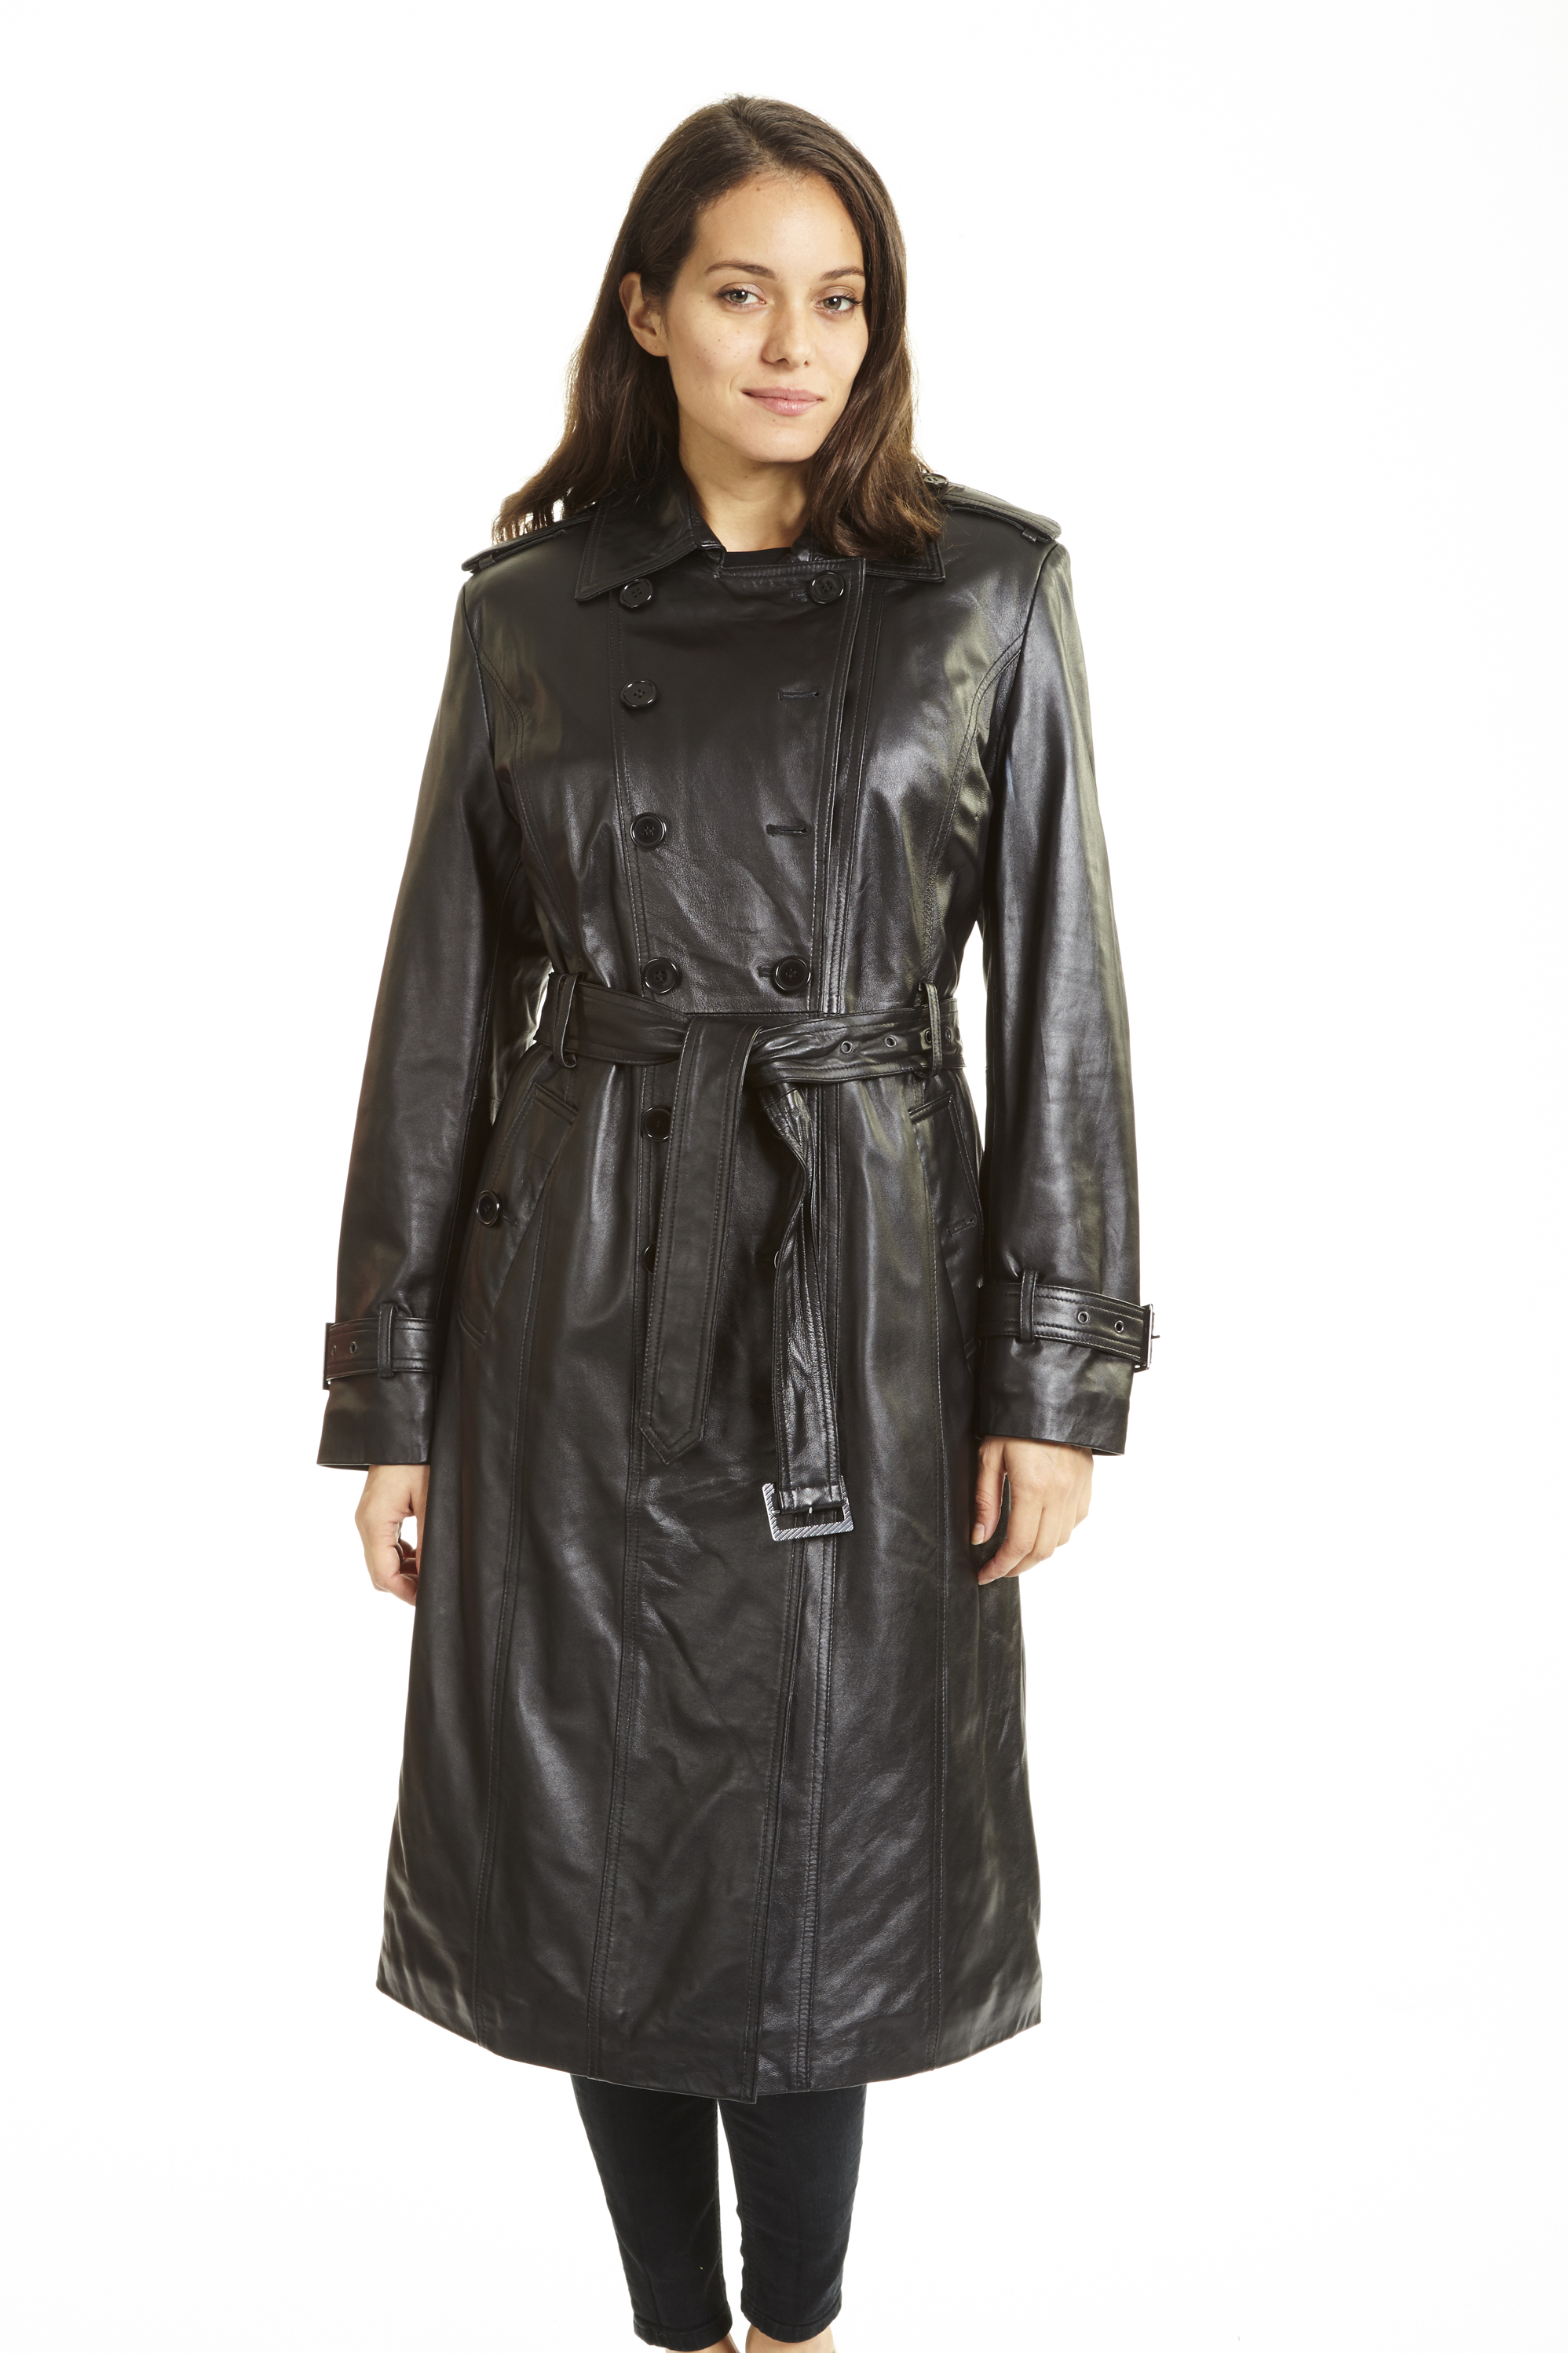 Excelled Women's Lambskin Leather Trench